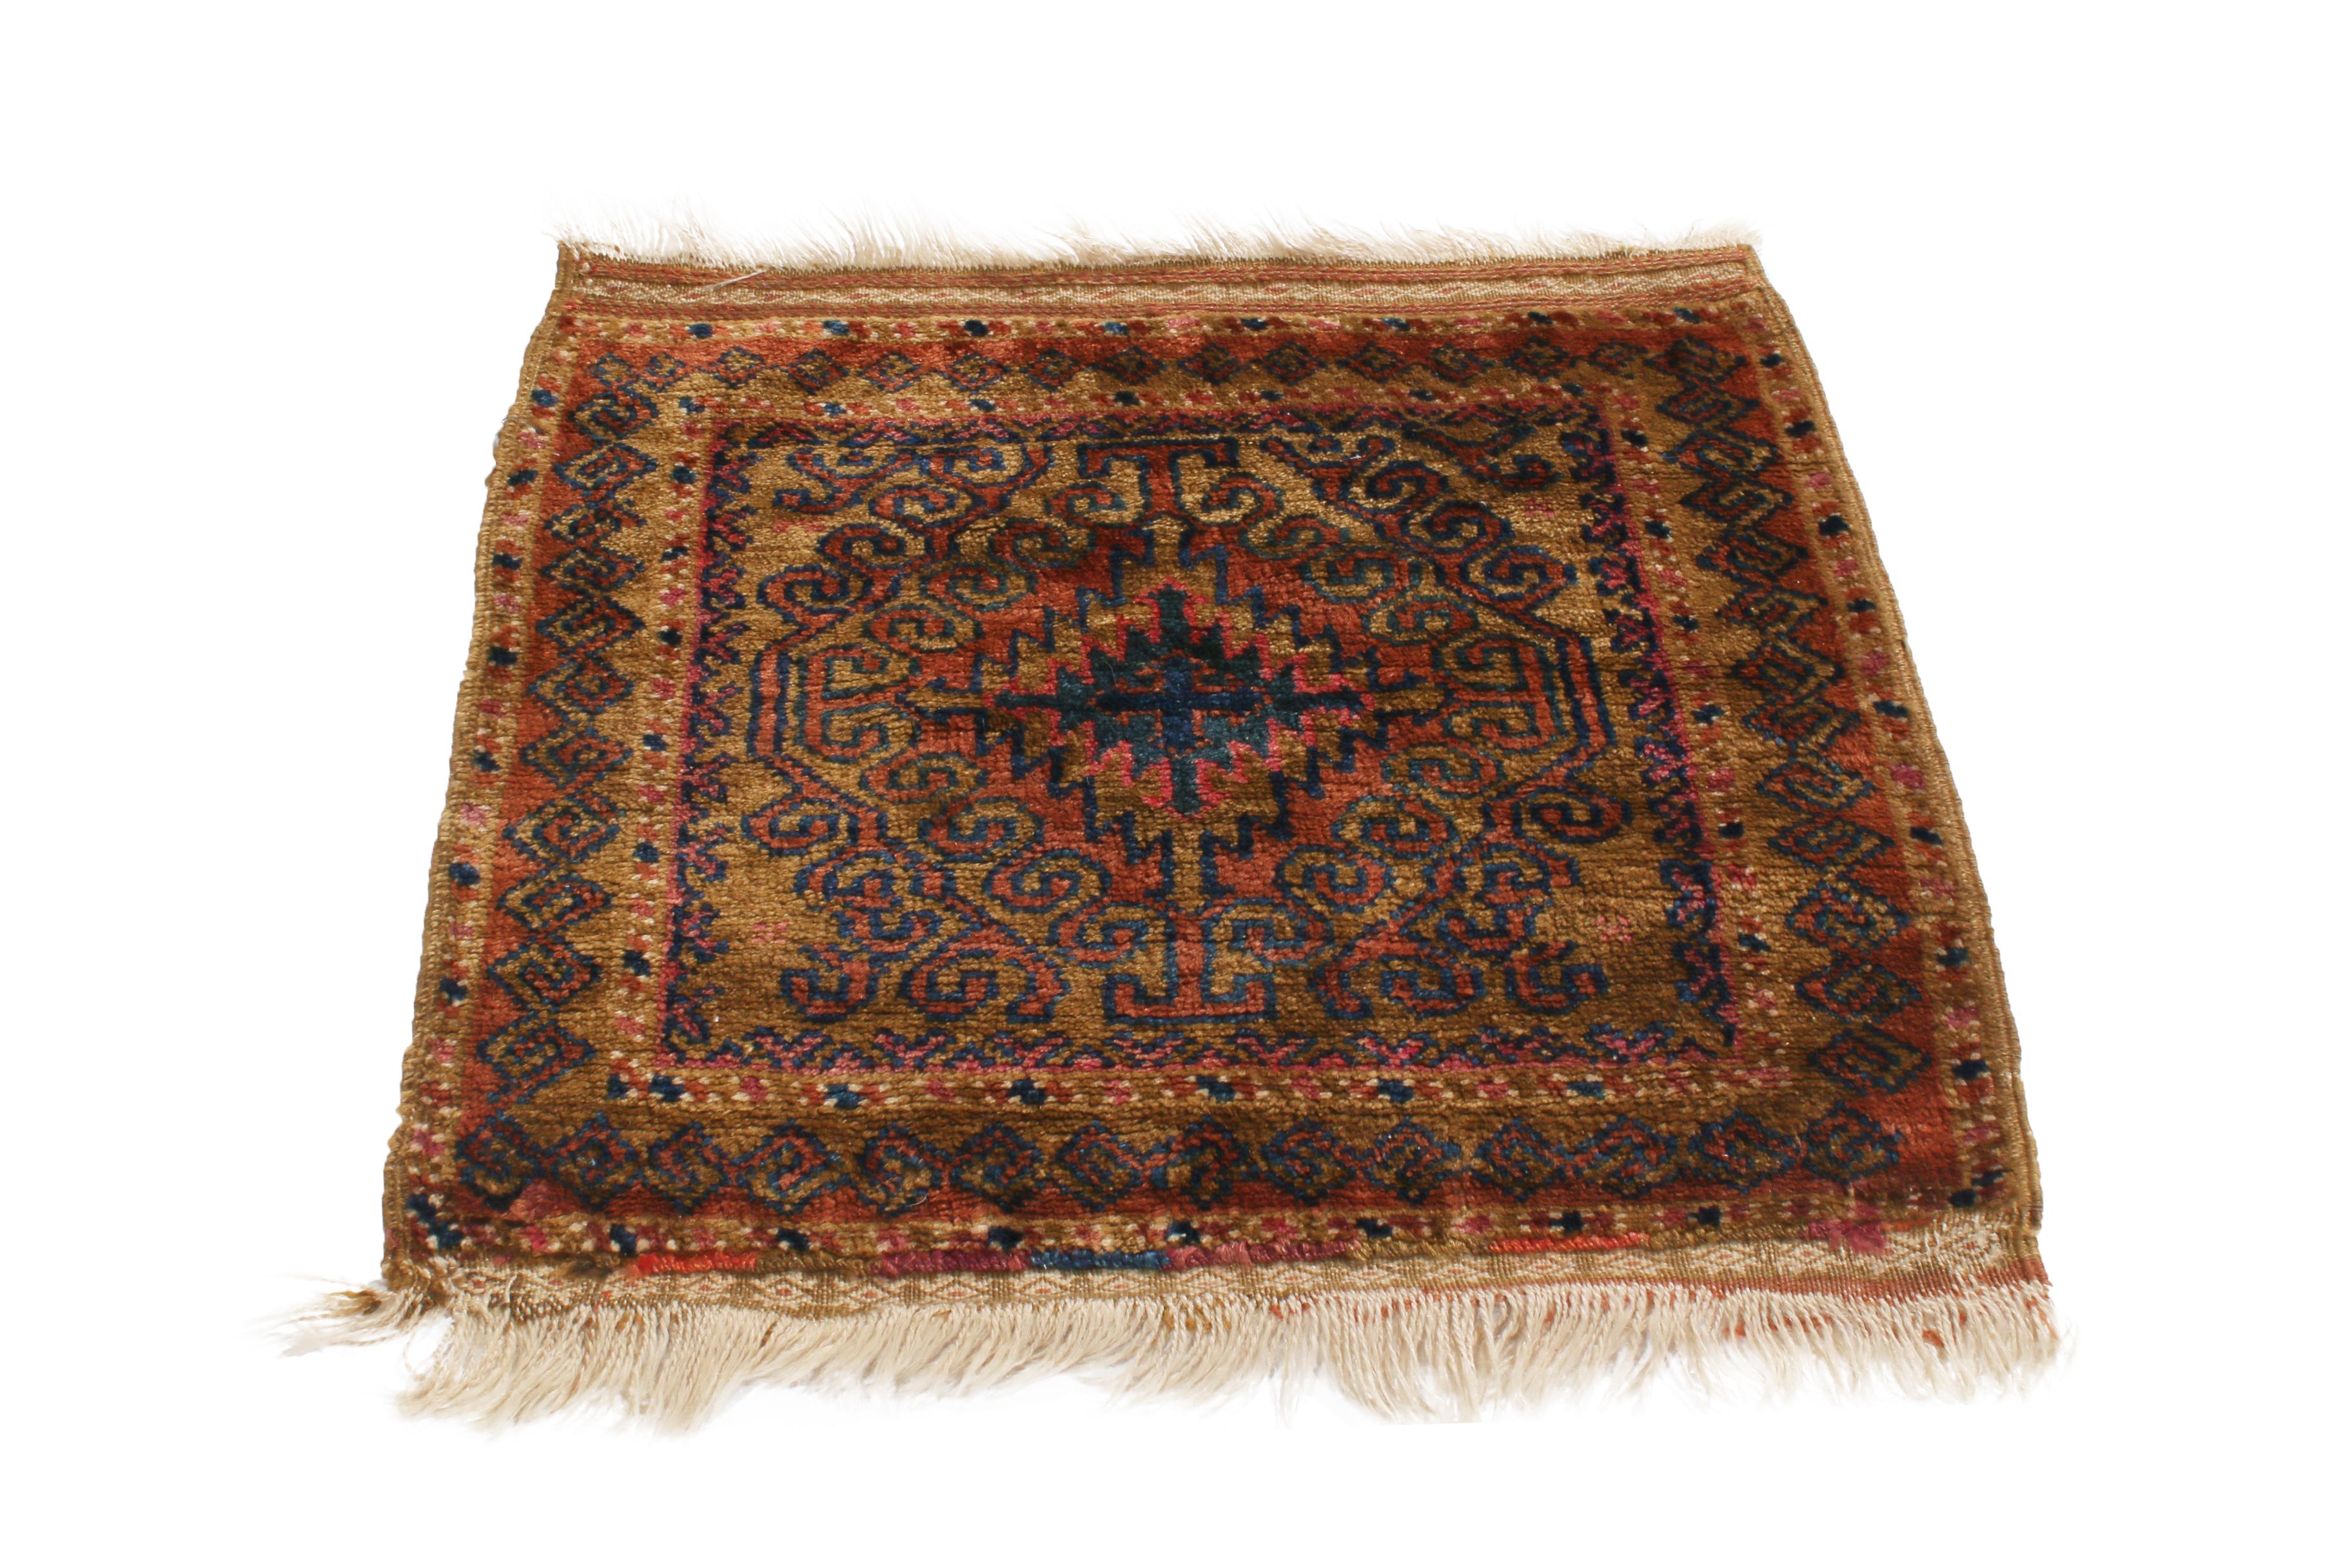 Originating from Persia in 1890, this antique Persian rug hails from the Baluch tribal family, ironically favoring one repeating motif such as this piece's interesting depiction of the ram’s Horn cross. Hand knotted in high quality wool, the series